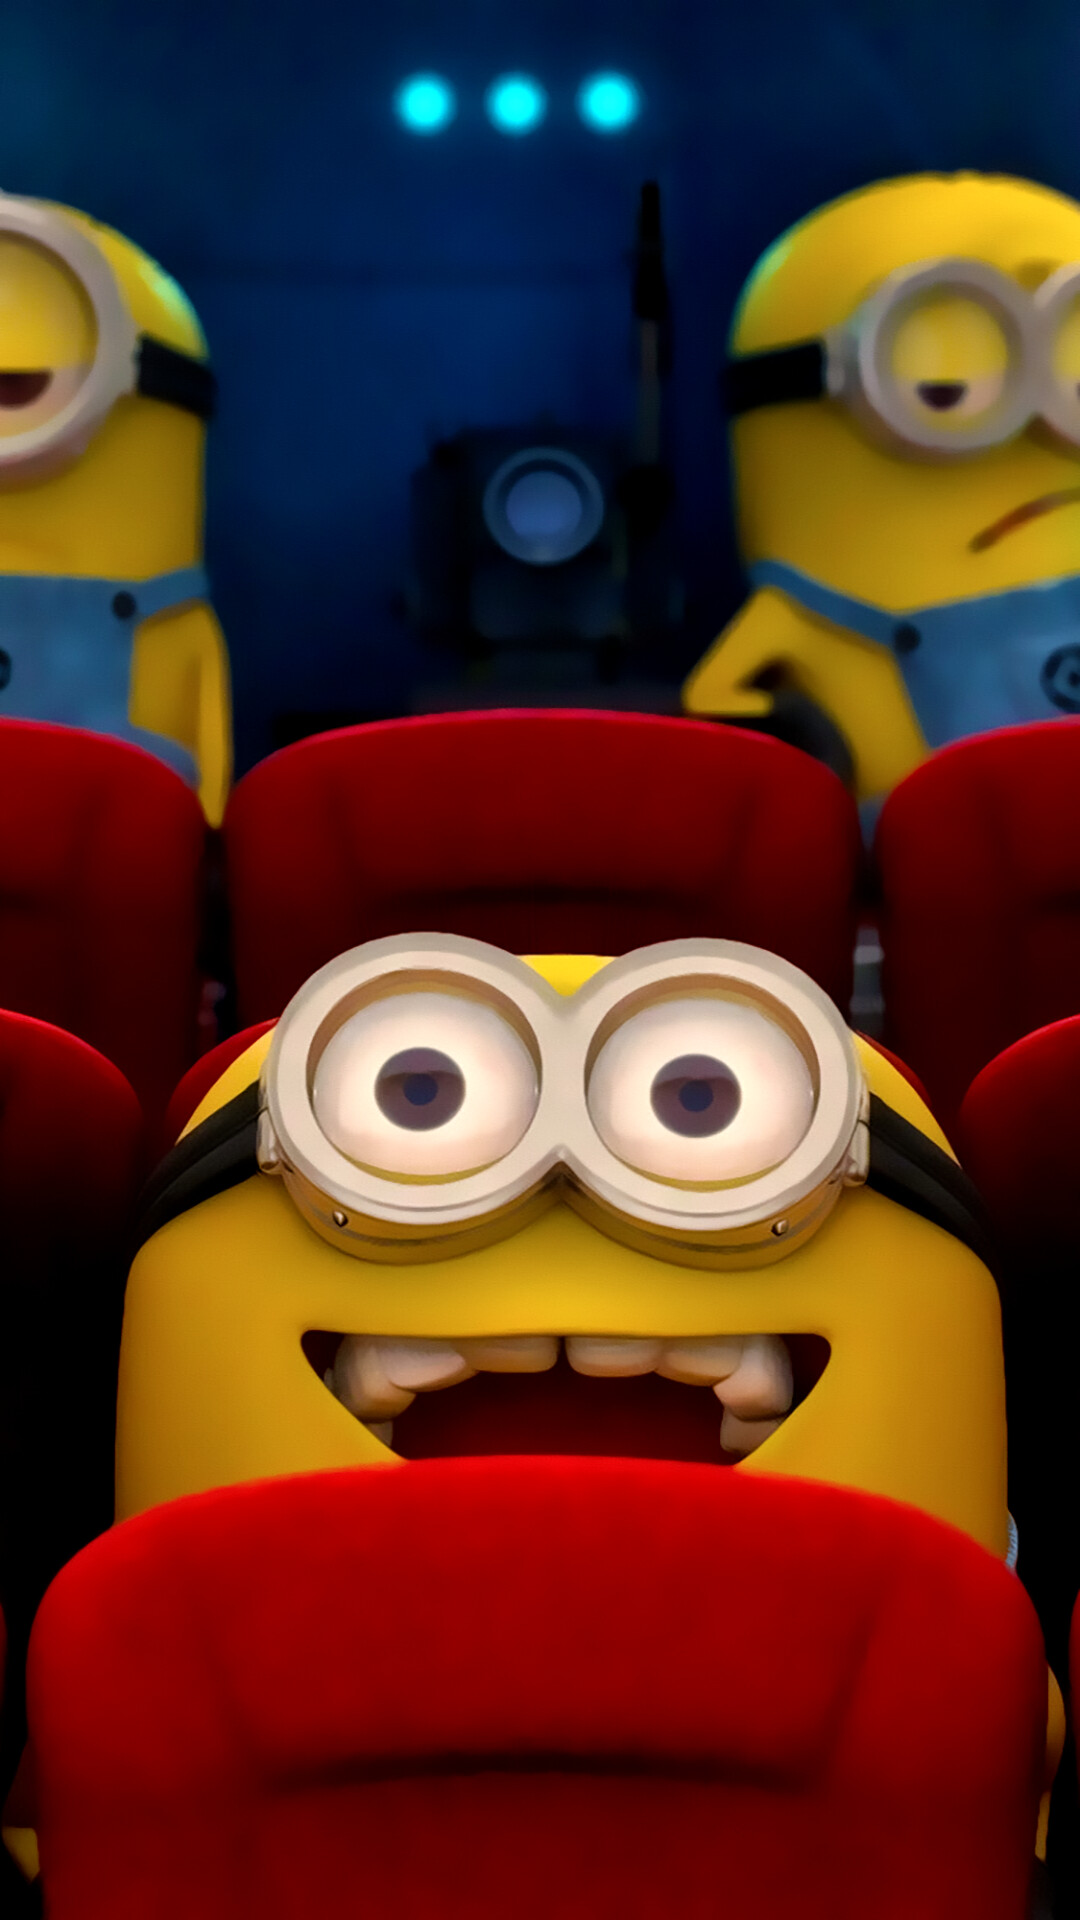 Minions: The Rise of Gru: A Despicable Me prequel about how young 11-year-old Gru. 1080x1920 Full HD Background.